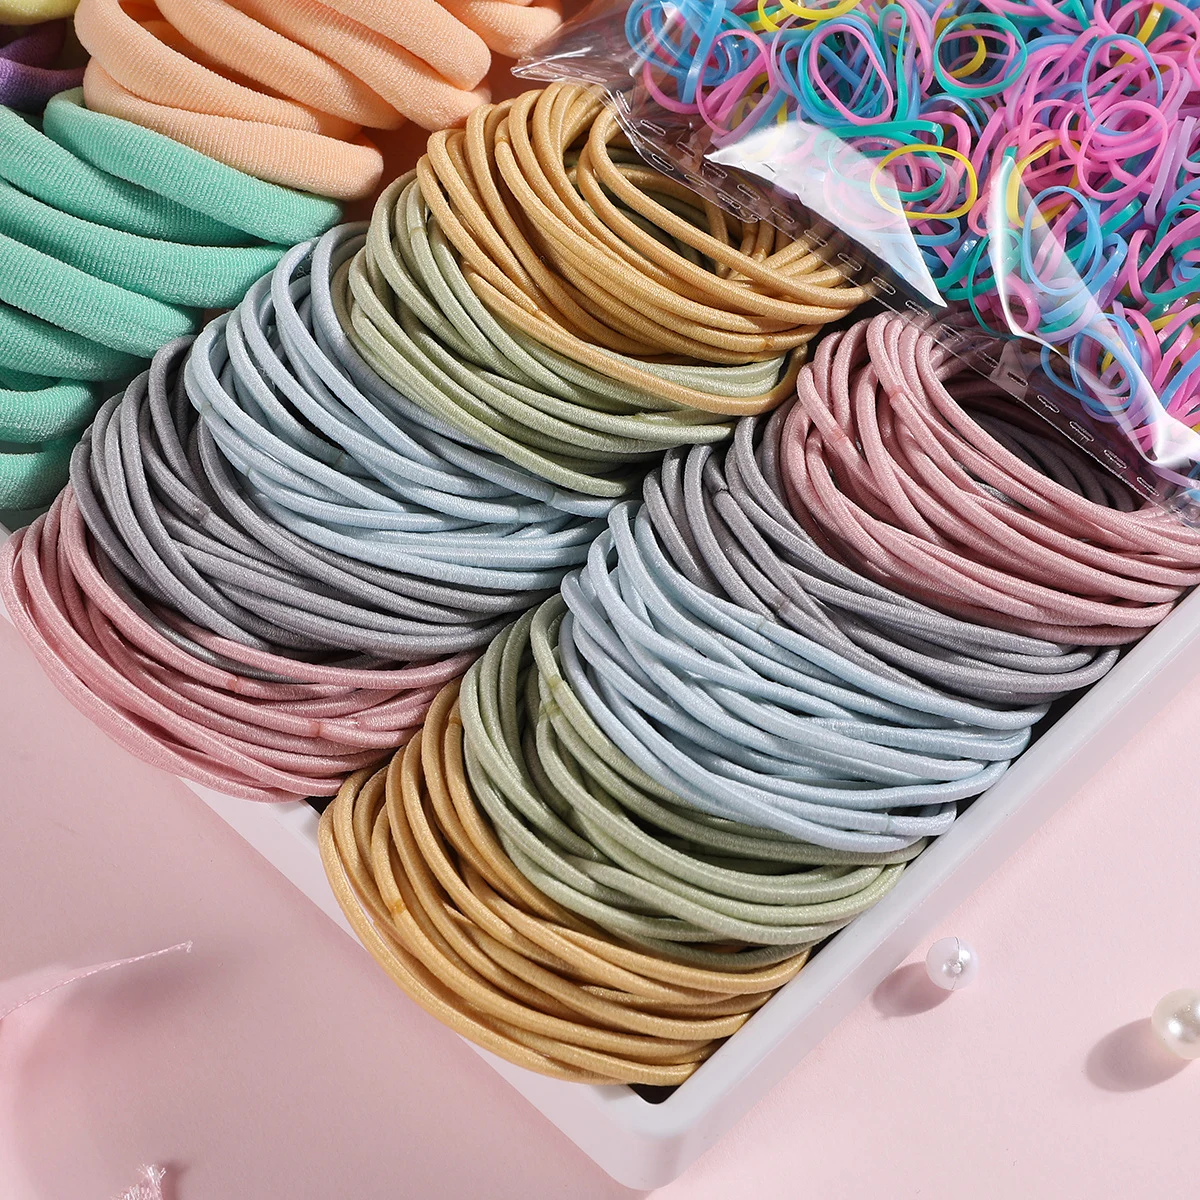 1159Pcs Girls Hair Accessories Sets Satin Scrunchies Candy Color Nylon Hair Ties Children Elastic Rubber Bands Ponytail Holder